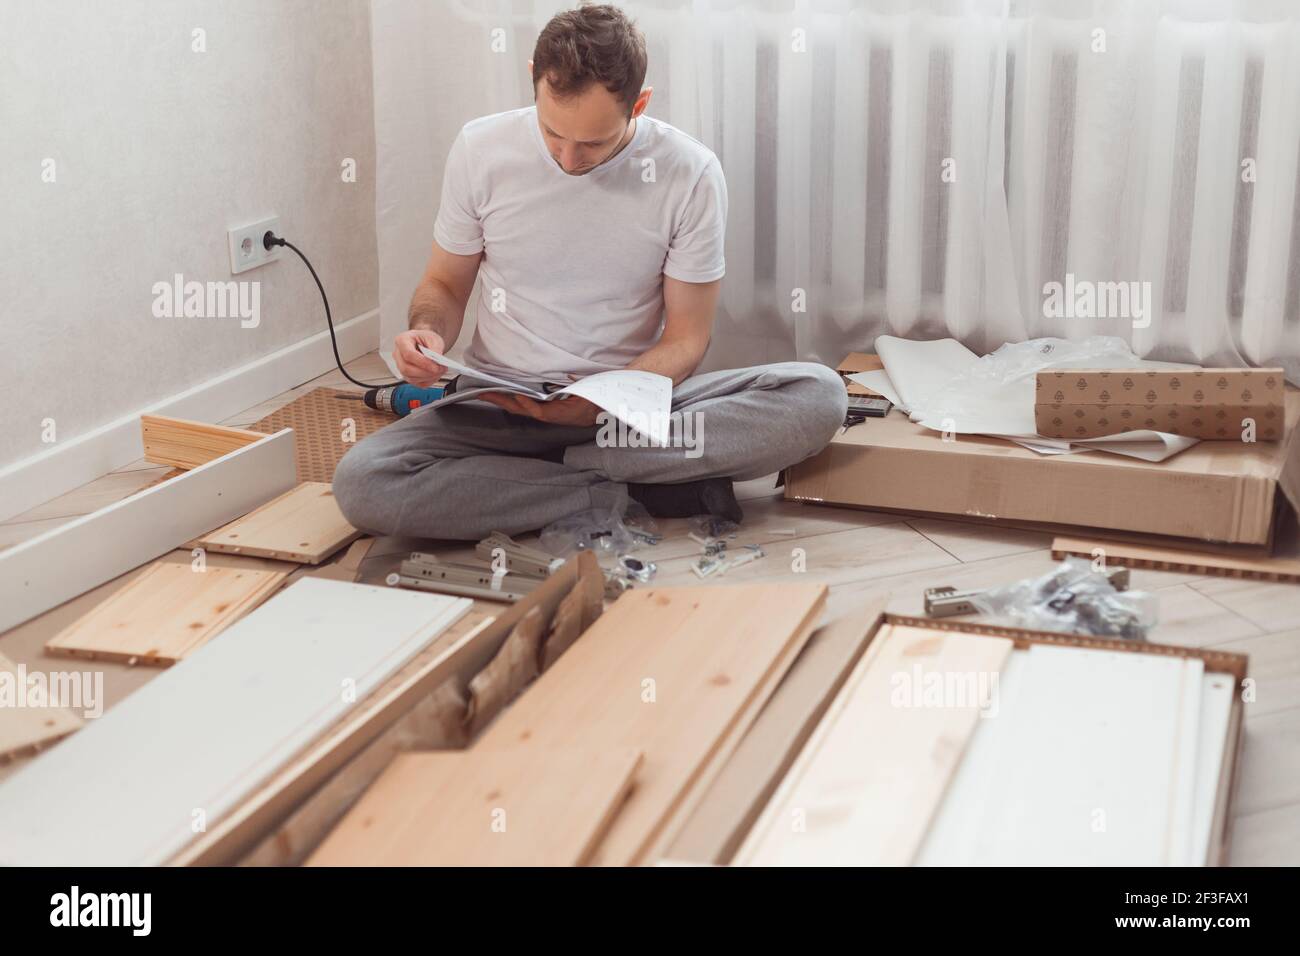 Bewildered man assembling new wooden furniture at home. Man reading instructions and misunderstand what to do the next. Stock Photo